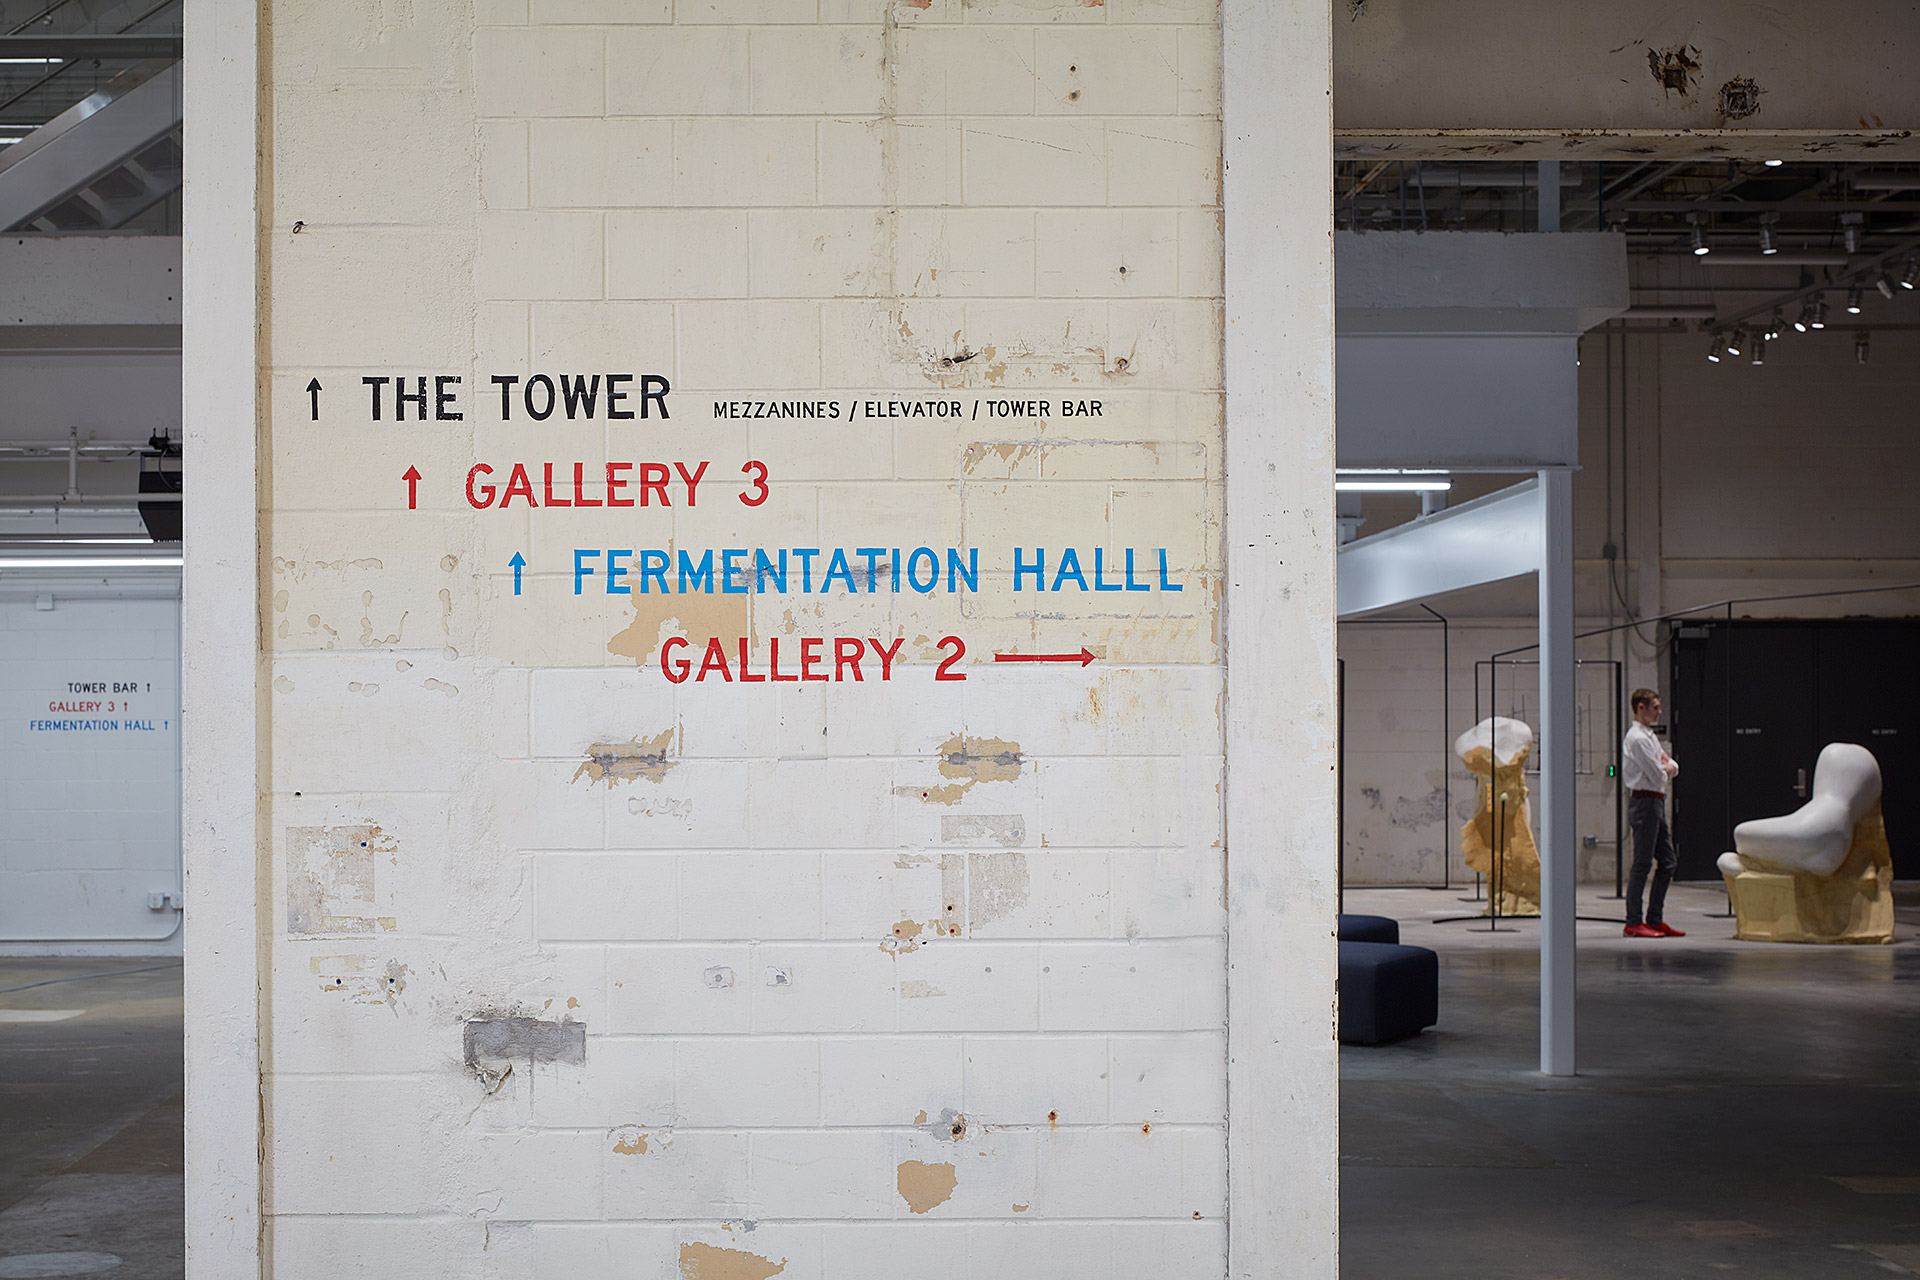 A sign on a brick wall leading to the tower, gallery 3, or the fermentation hall